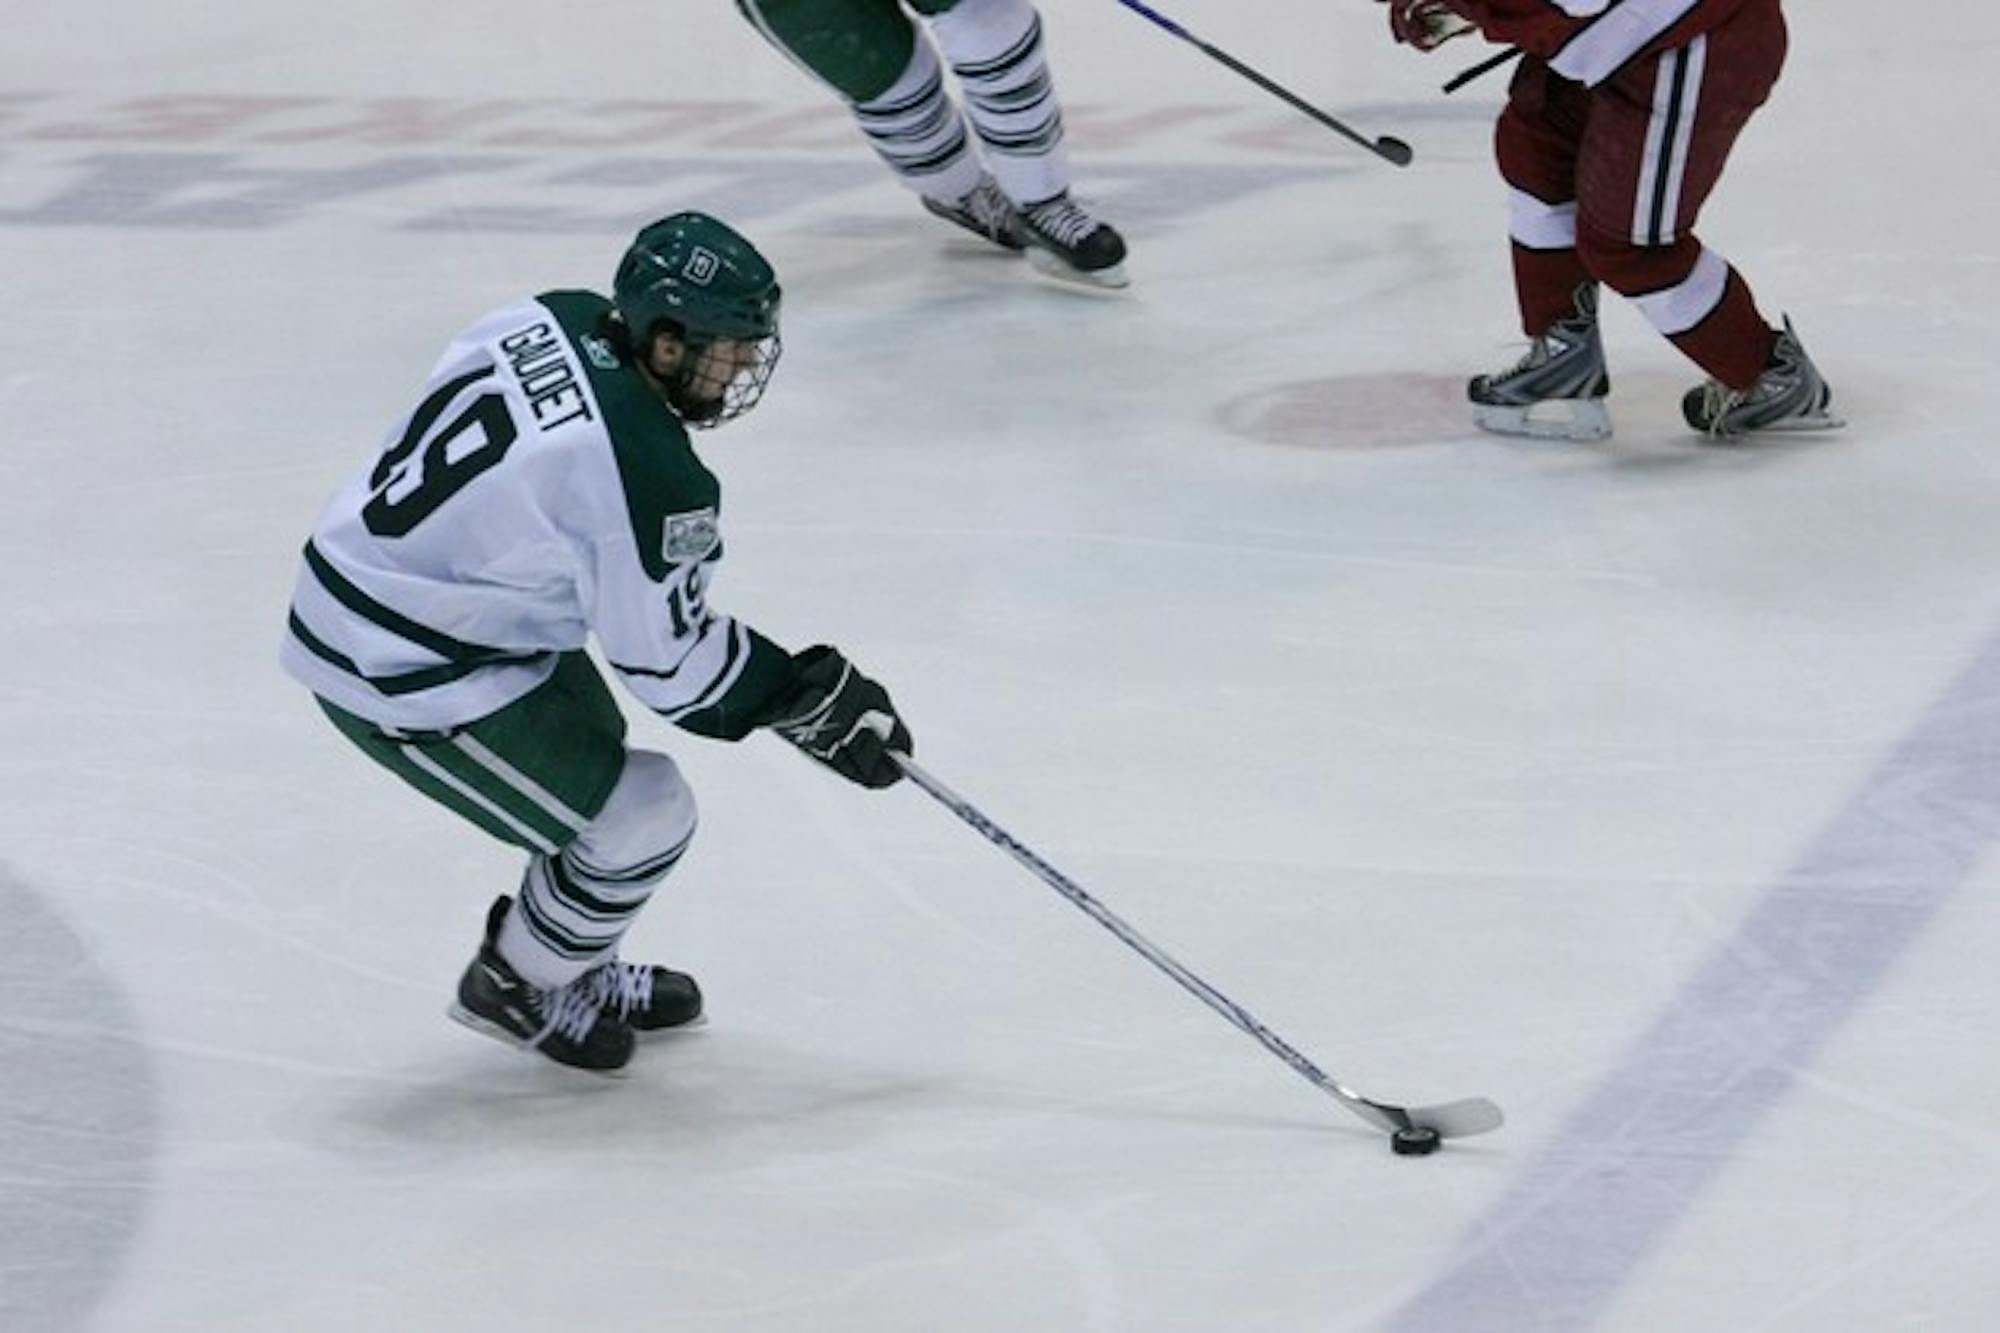 Dartmouth men's hockey split the weekend, claiming victory over Brown on Friday but falling to Yale on Saturday.